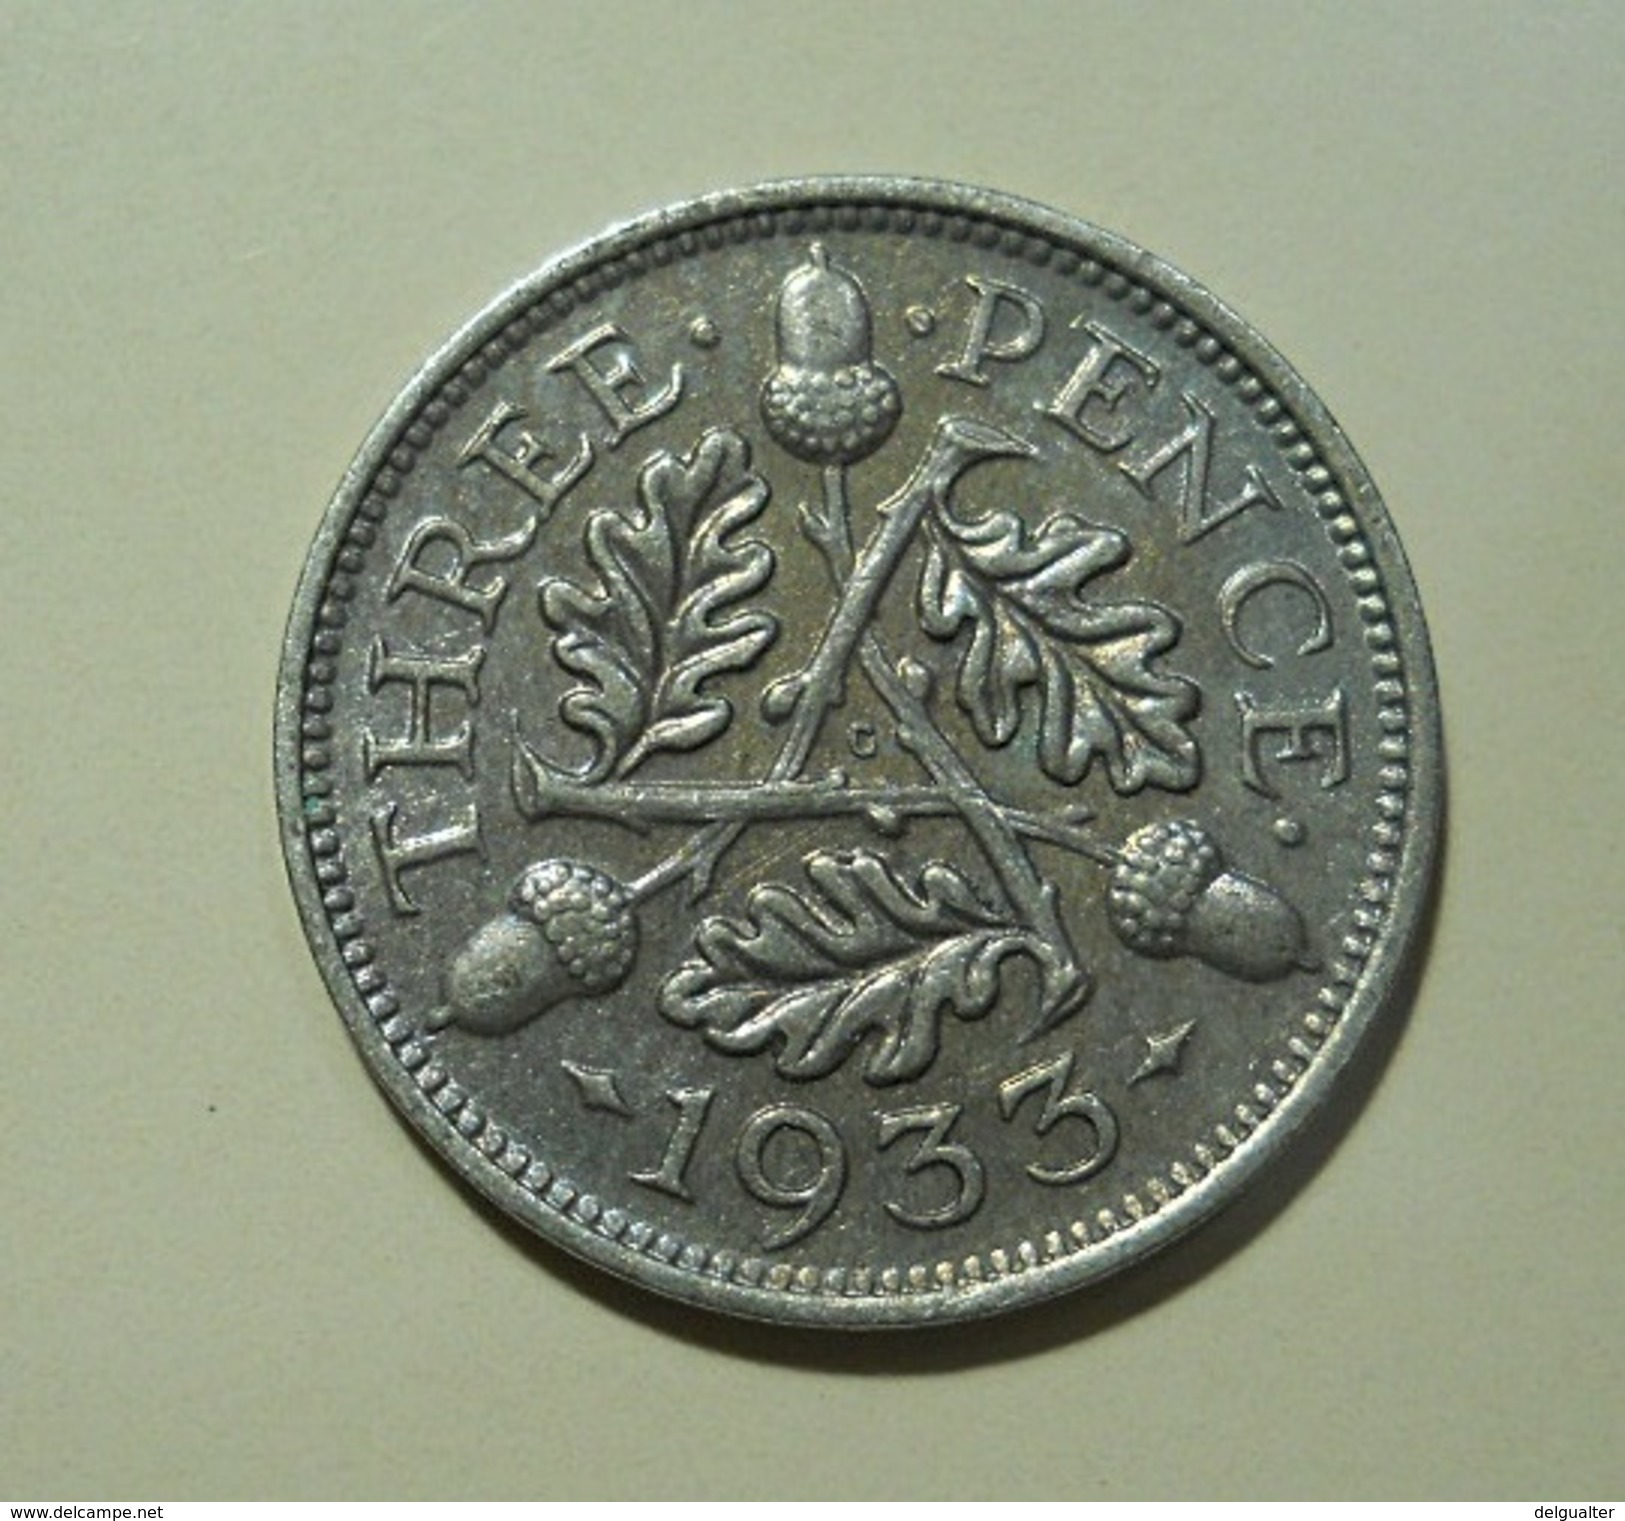 Great Britain 3 Pence 1933 Silver - F. 3 Pence